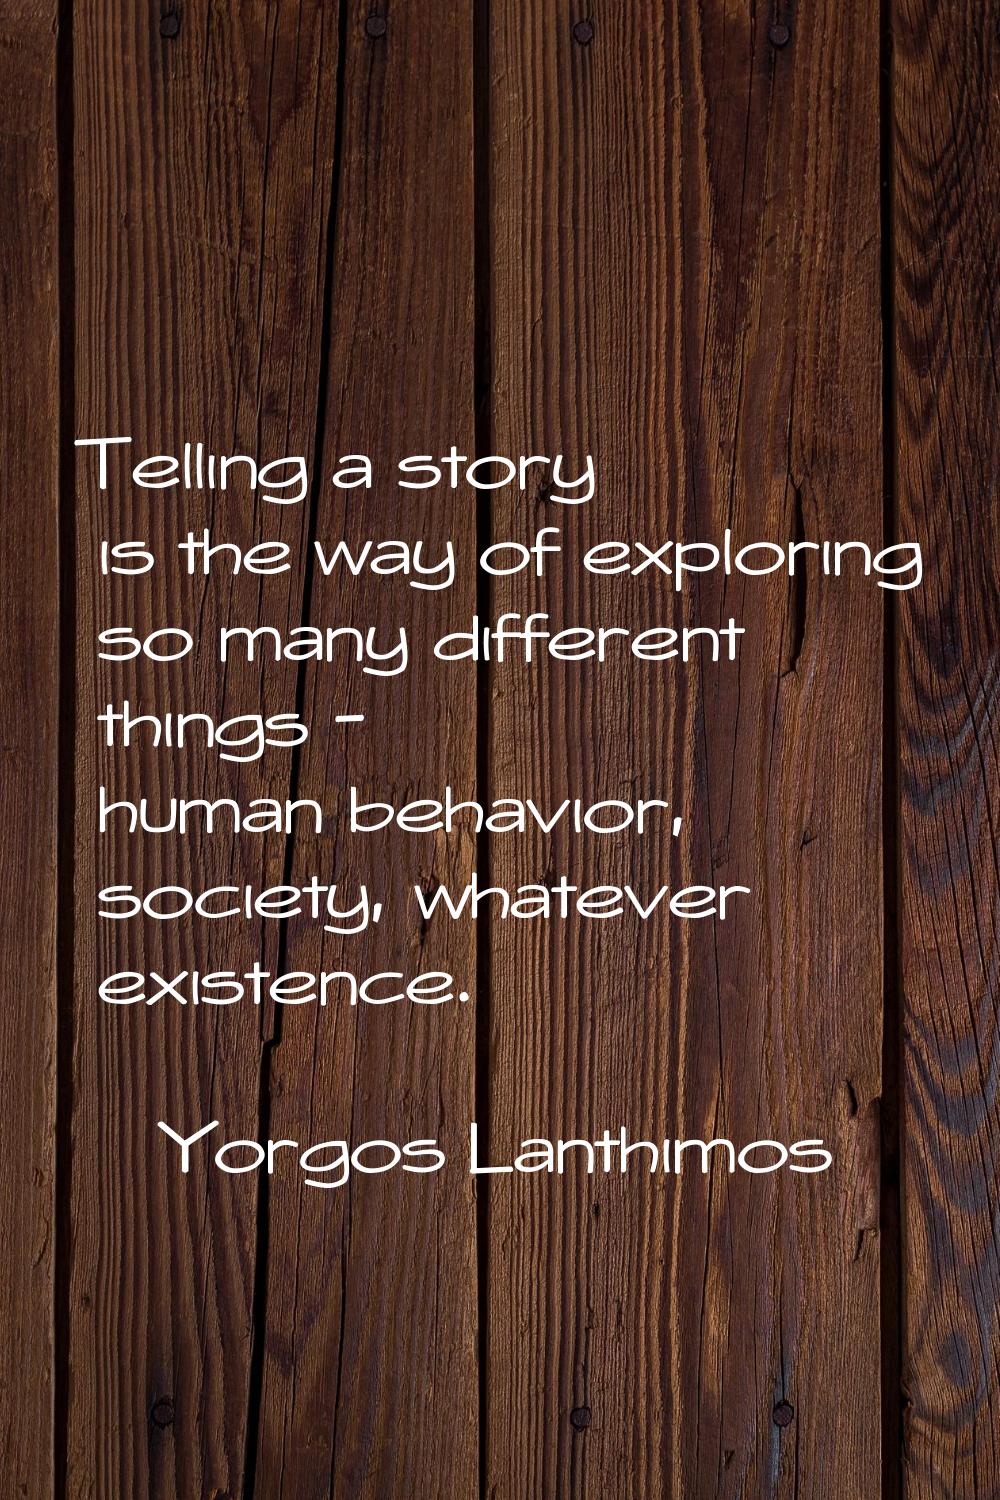 Telling a story is the way of exploring so many different things - human behavior, society, whateve